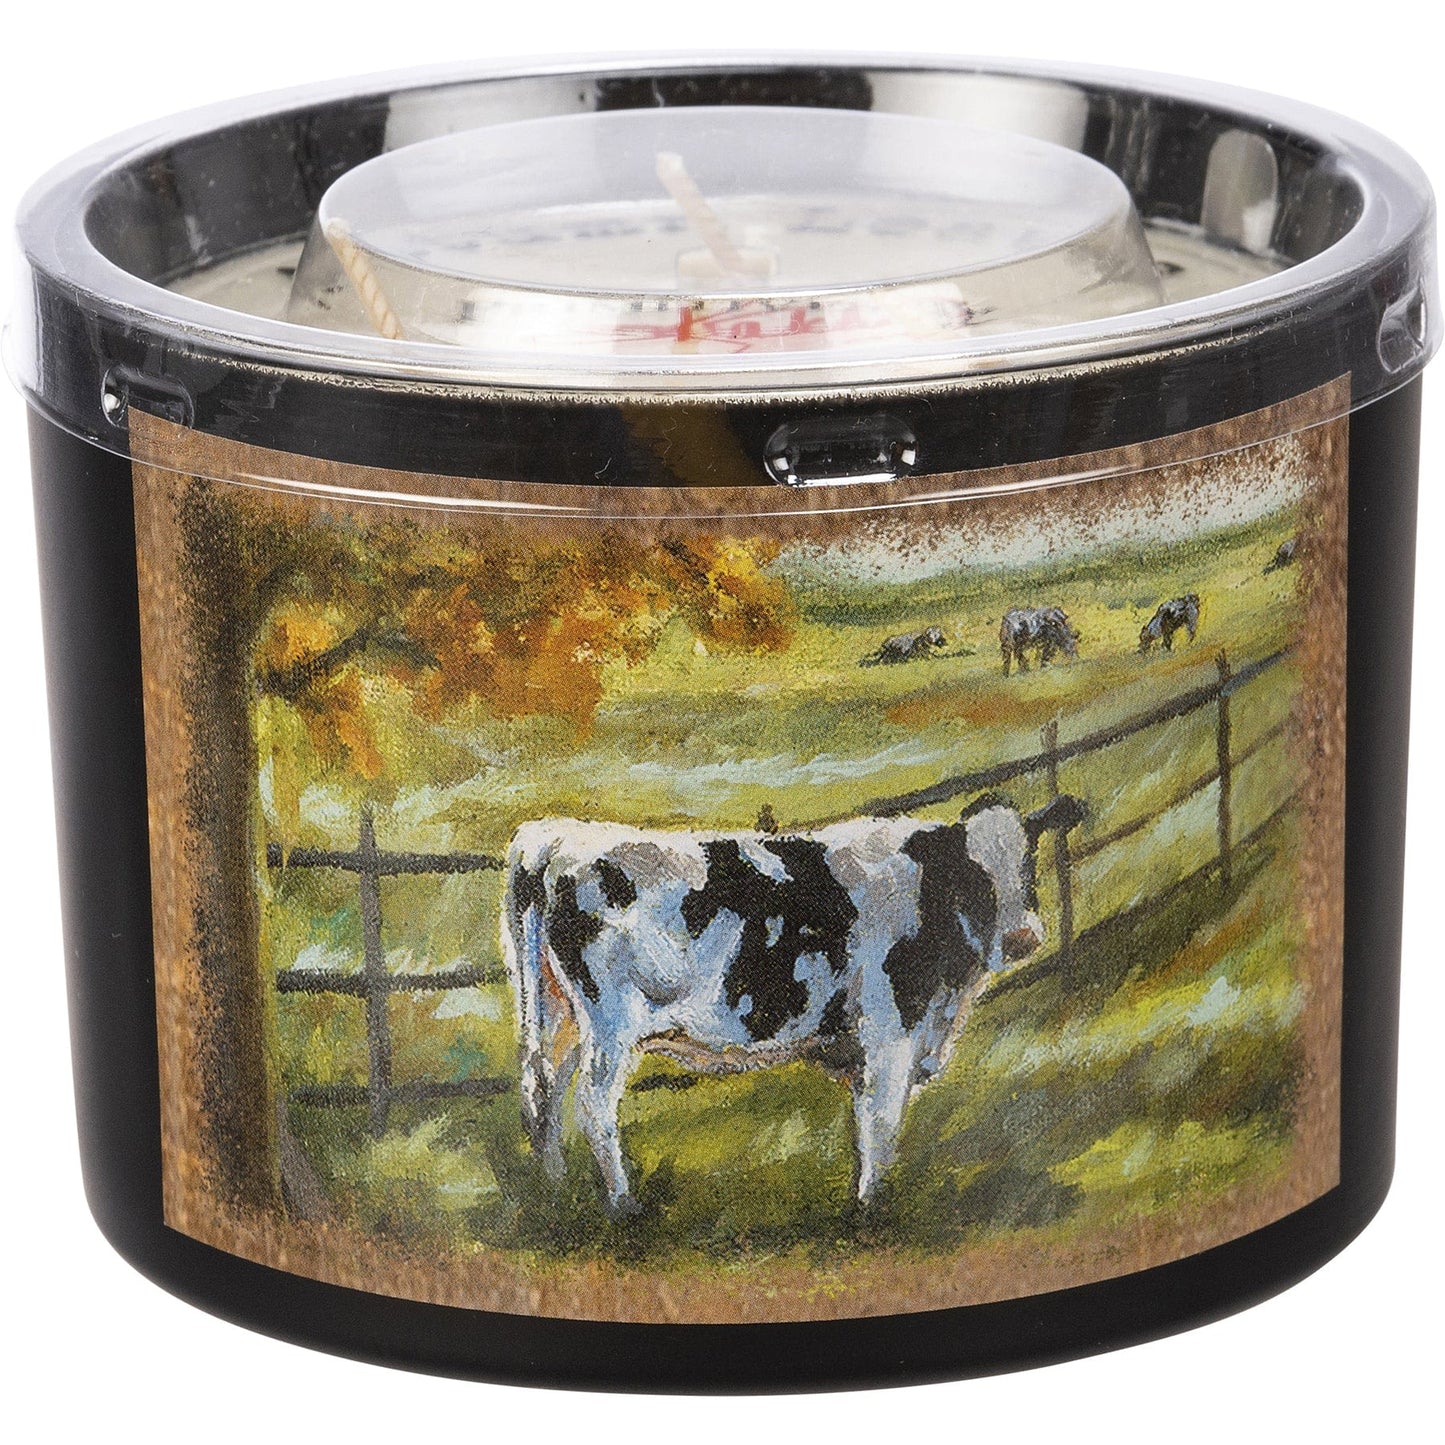 Candles Jar Candle - Fall Cows - Autumn Leaves PBK-110875